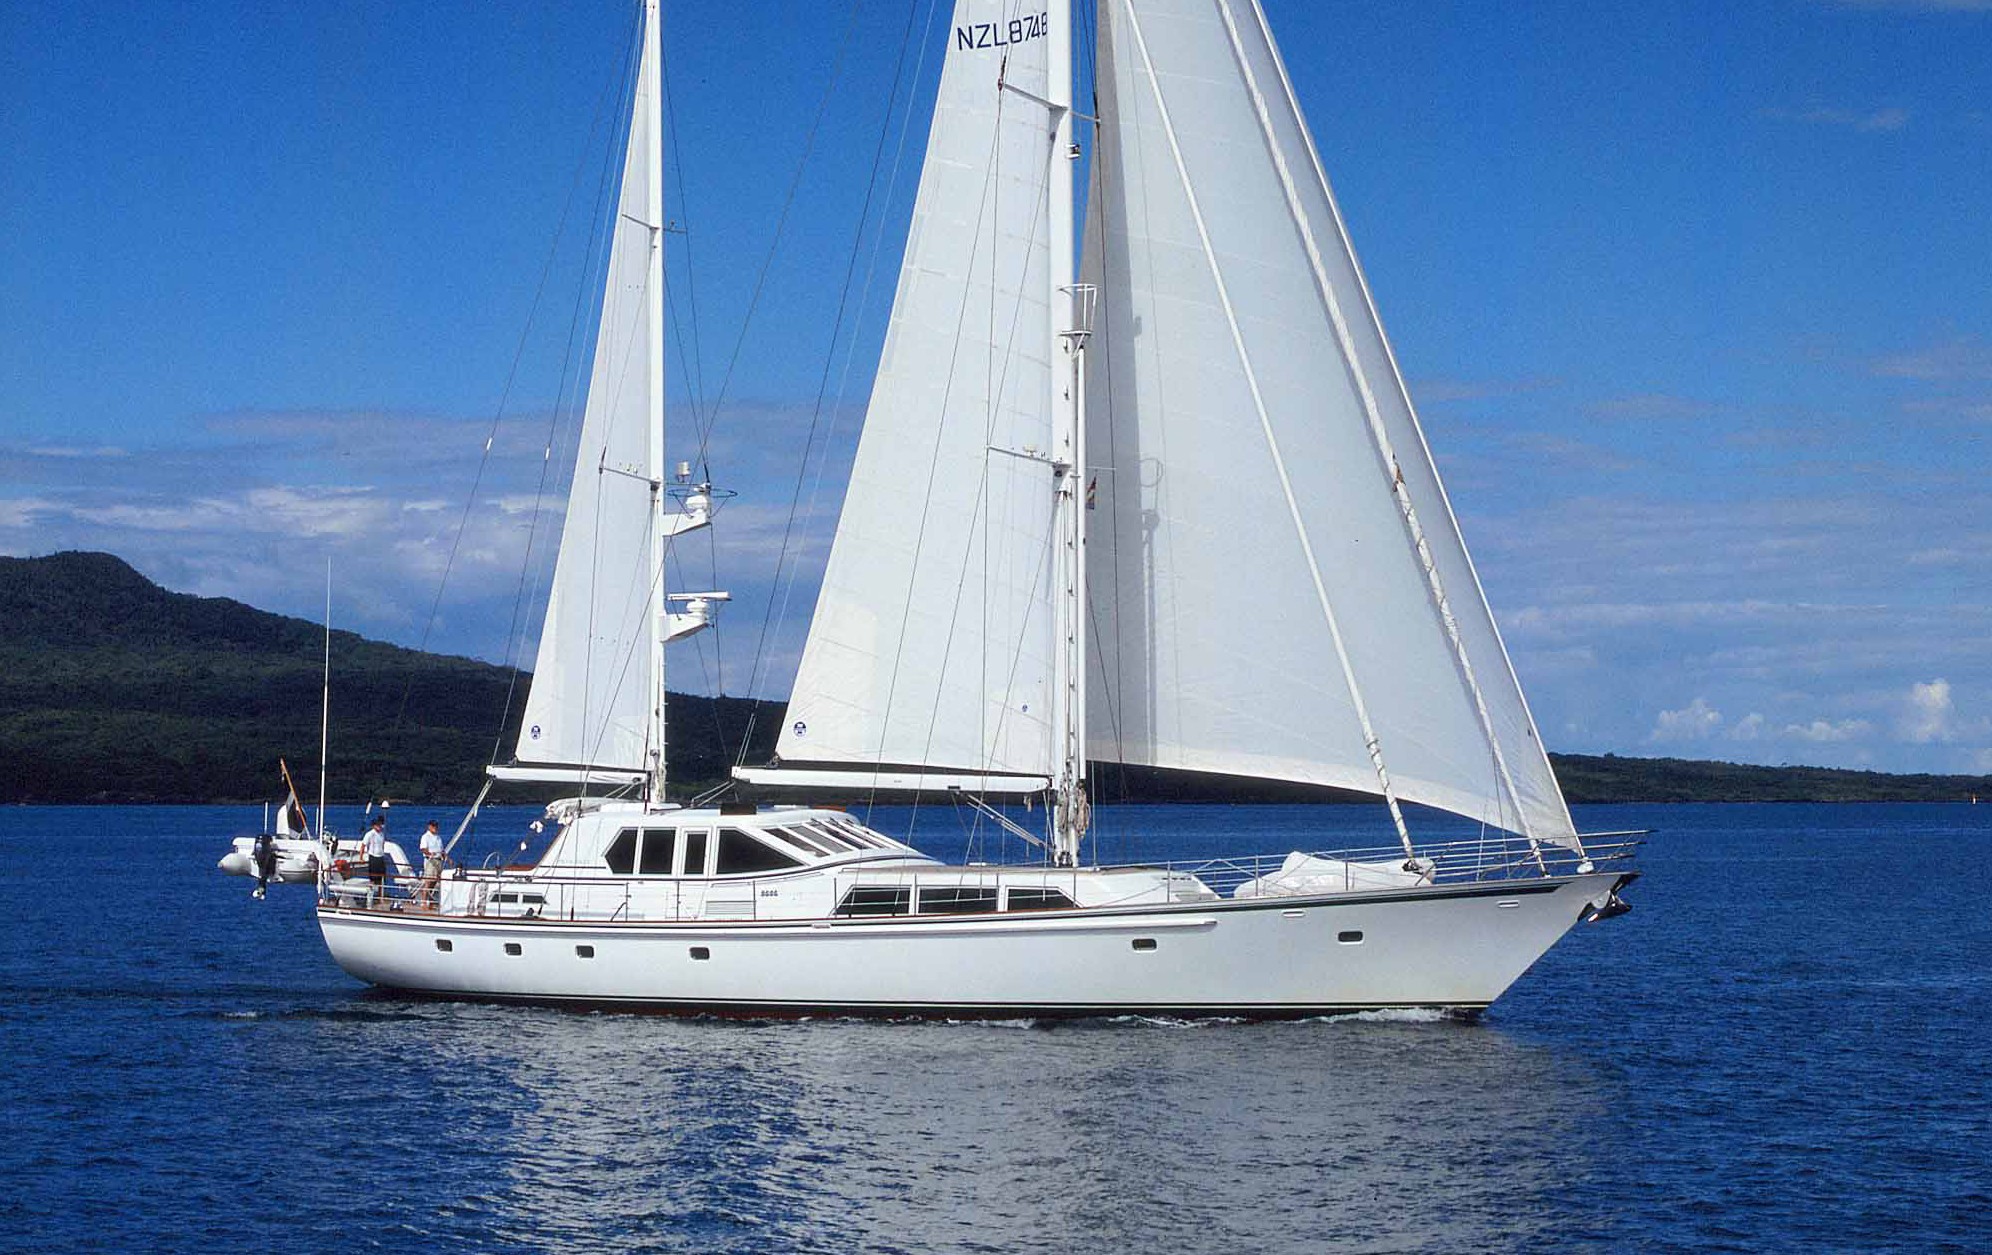 The 34m Yacht PACIFIC EAGLE